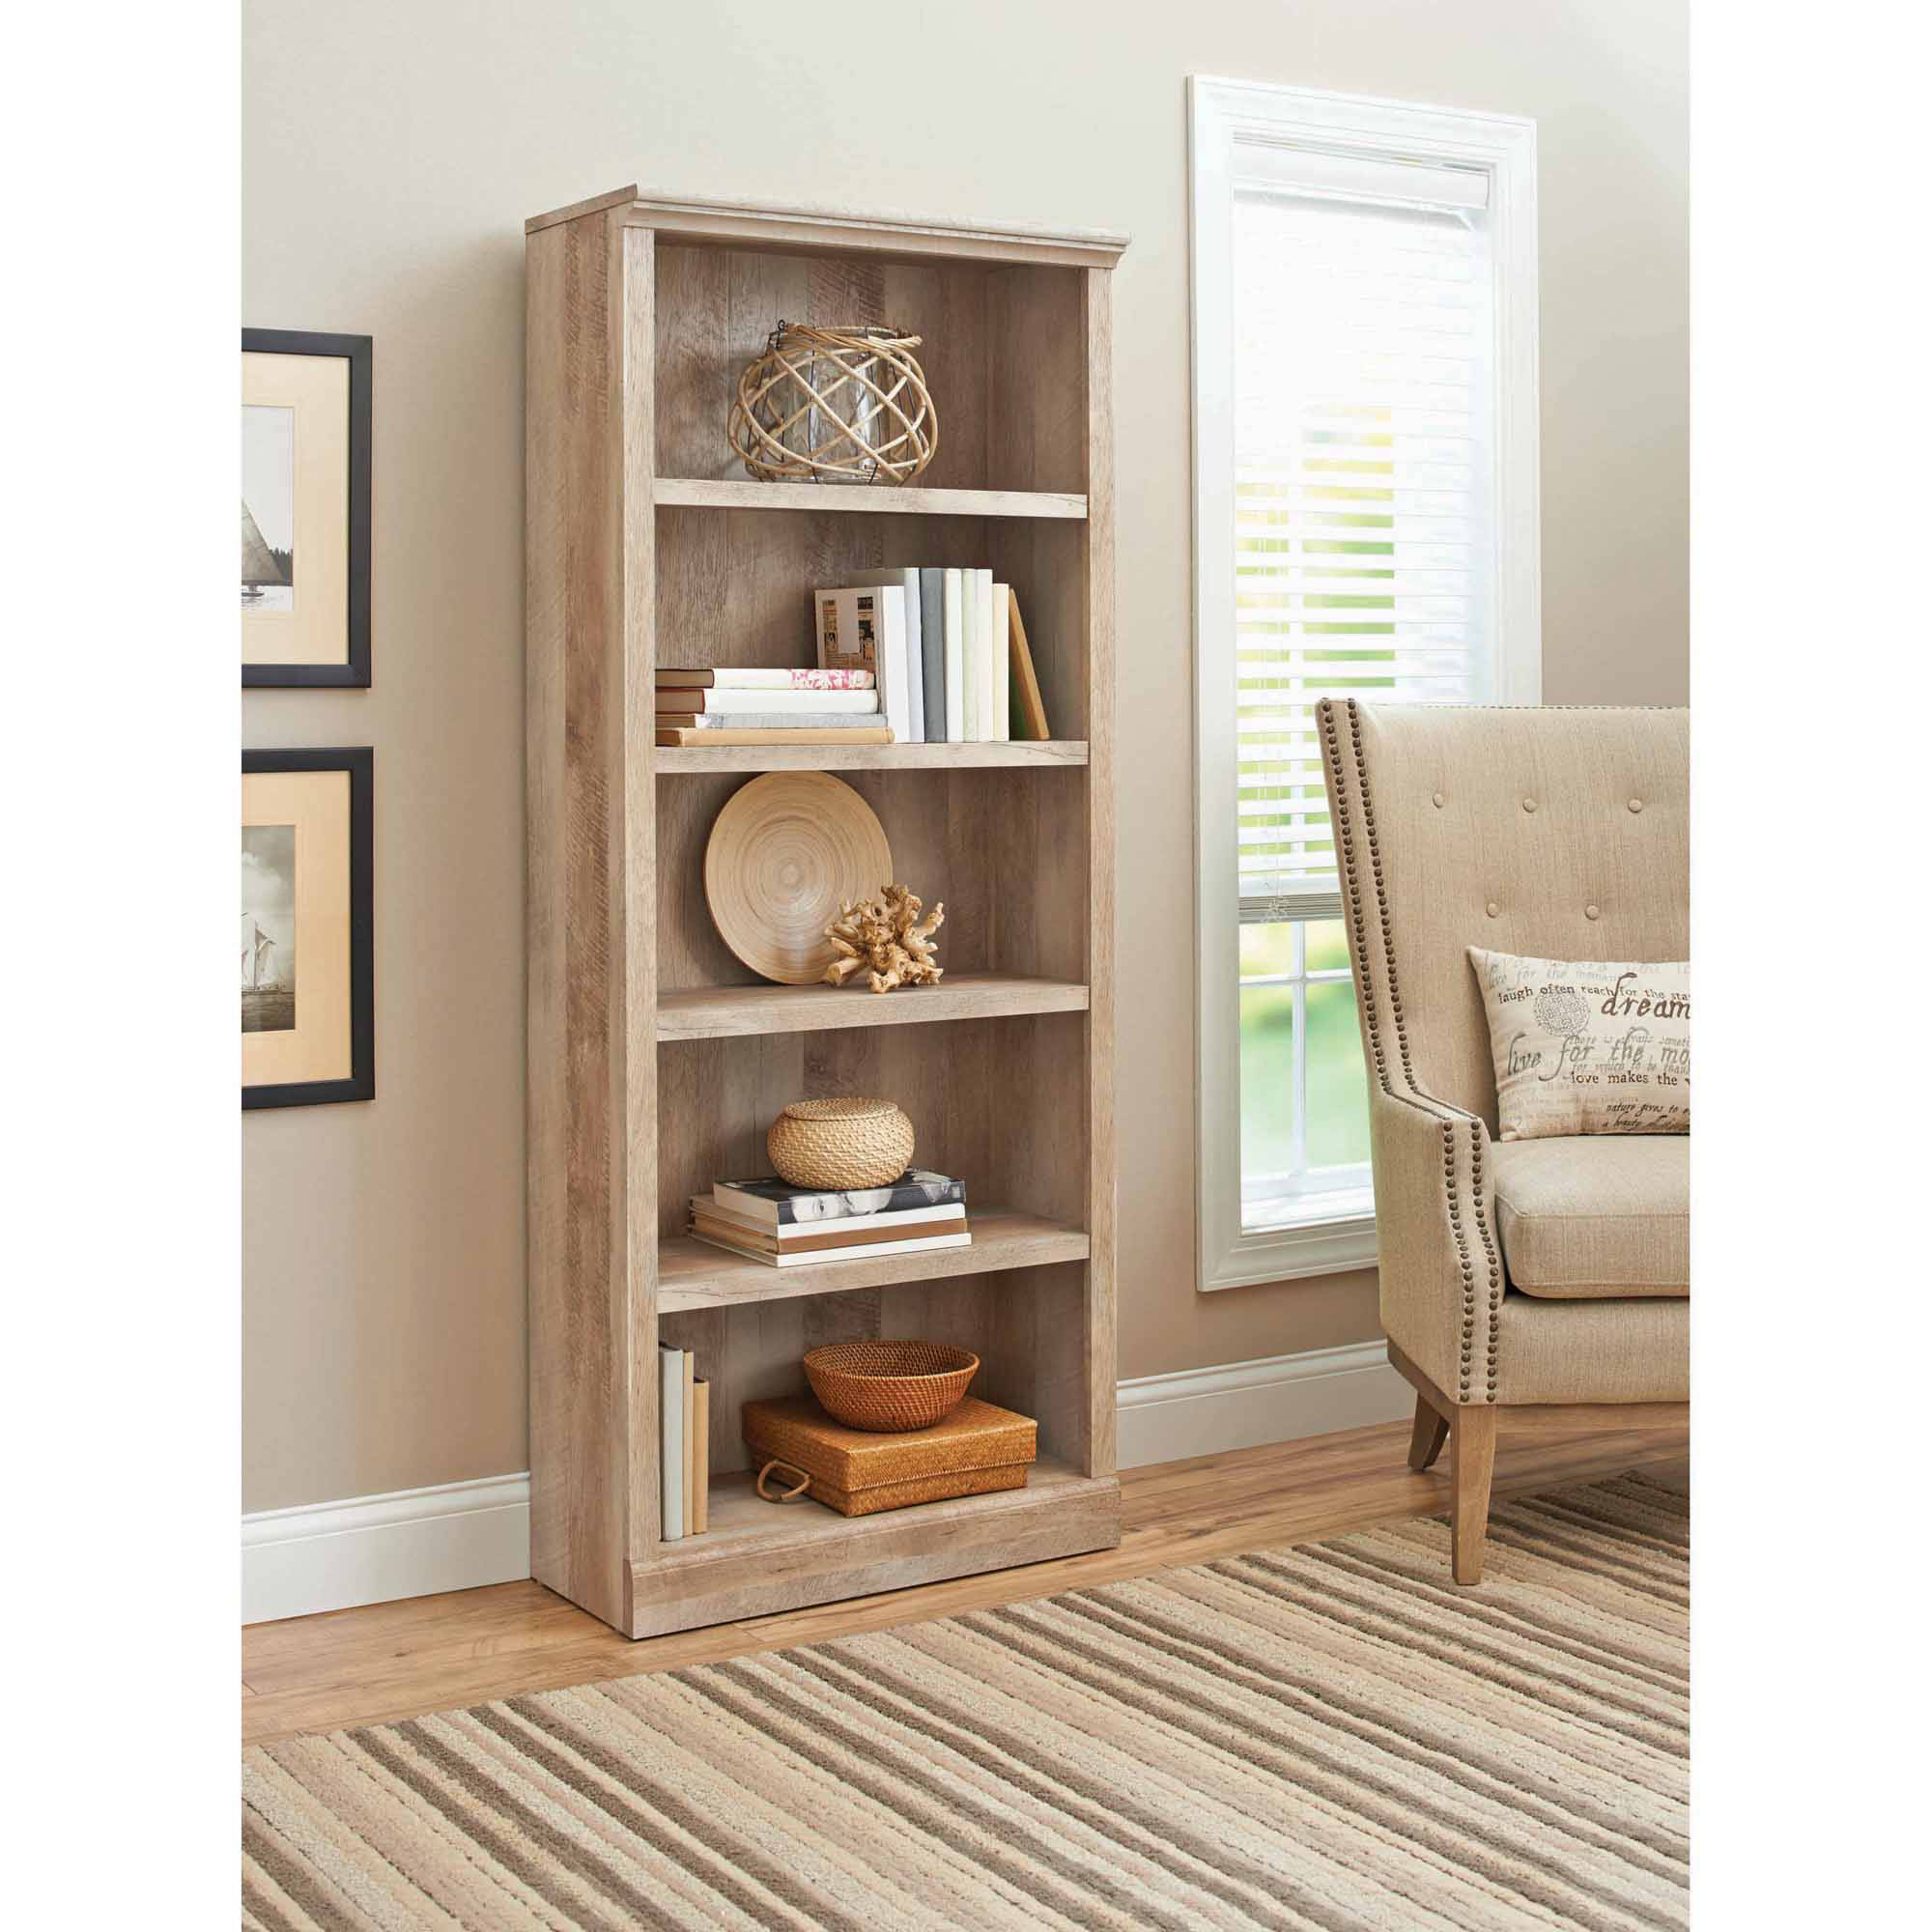 Details About 5 Shelves Wood Bookcase Adjustable Rustic Shelf Storage Tall Country Bookshelf intended for sizing 2000 X 2000